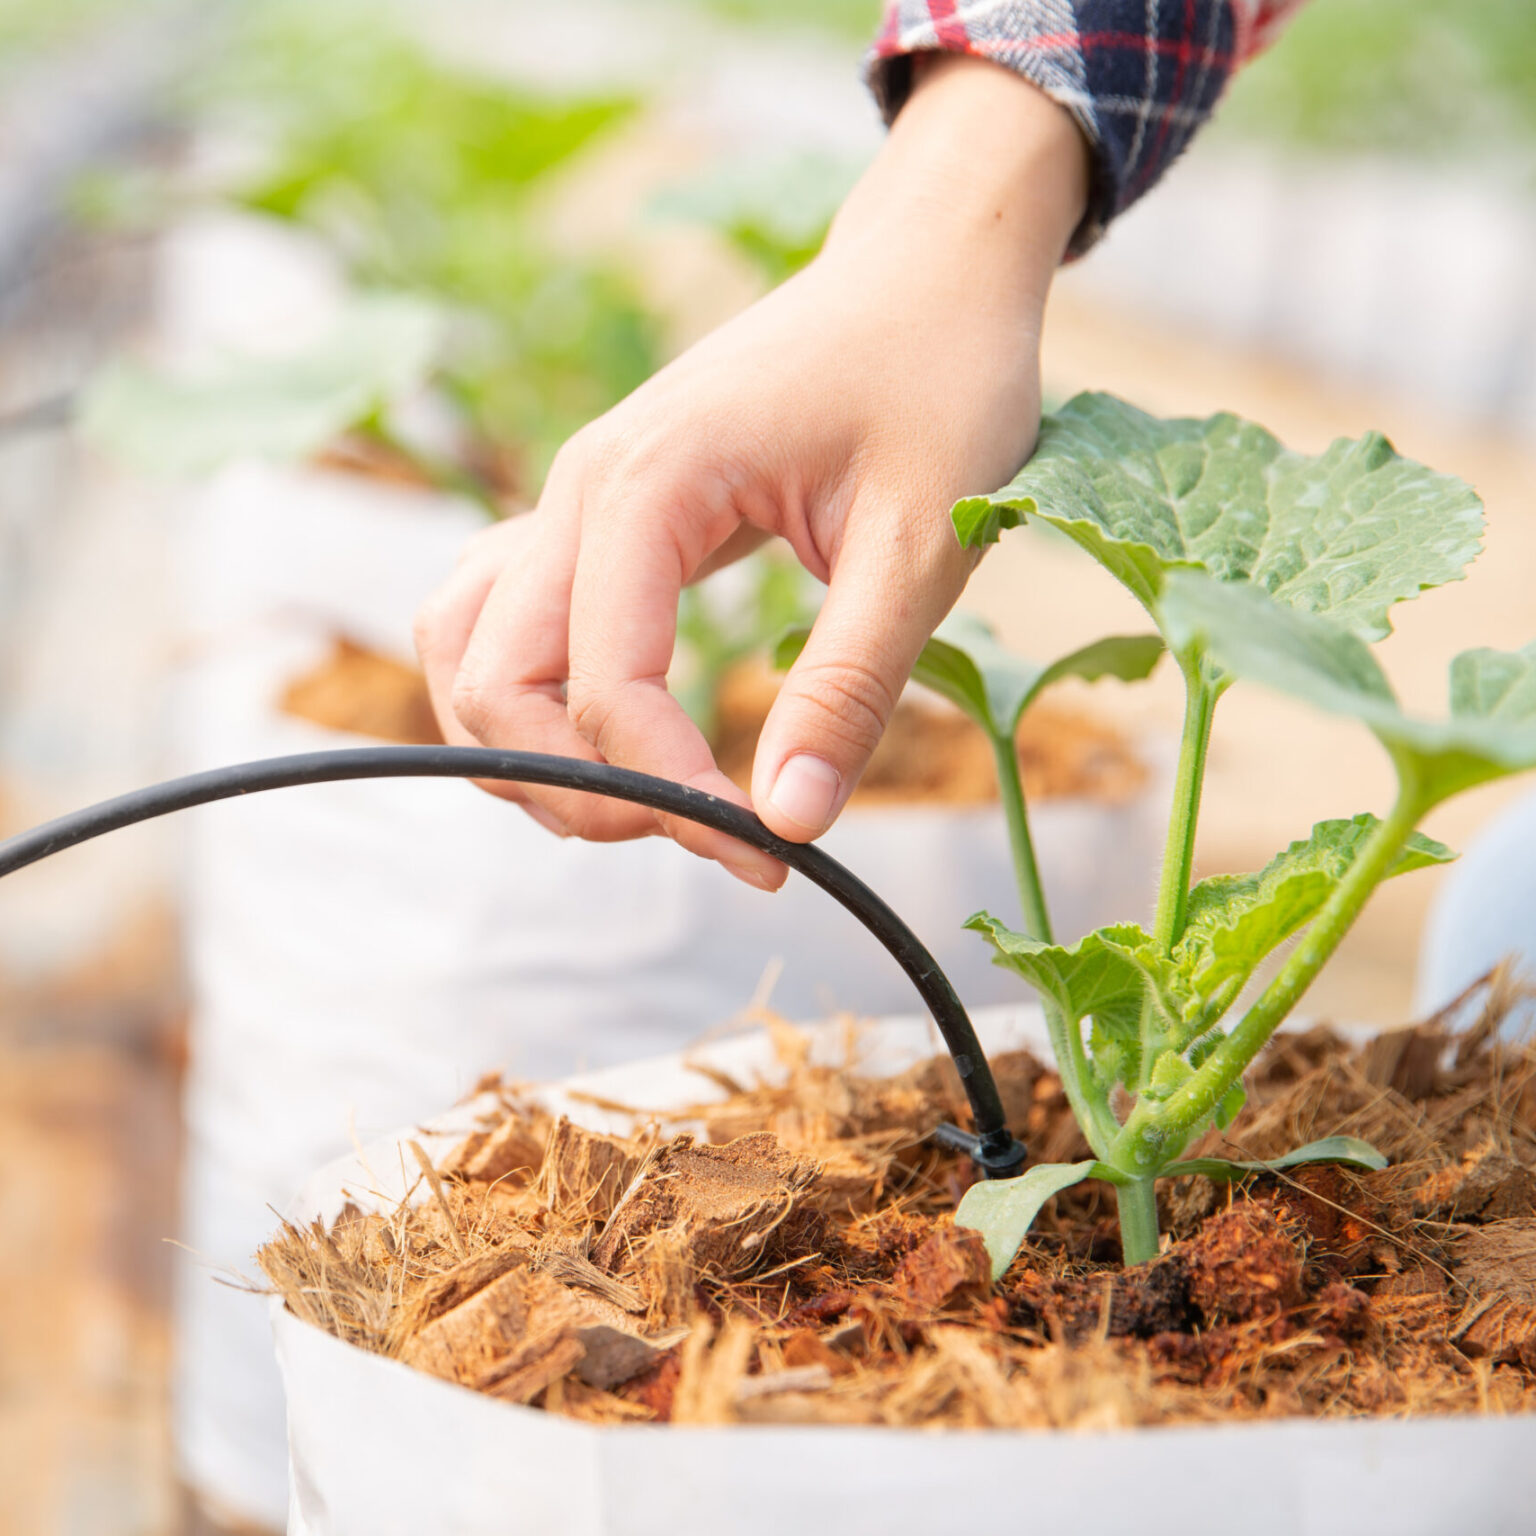 How to Install an Automatic Garden Irrigation System